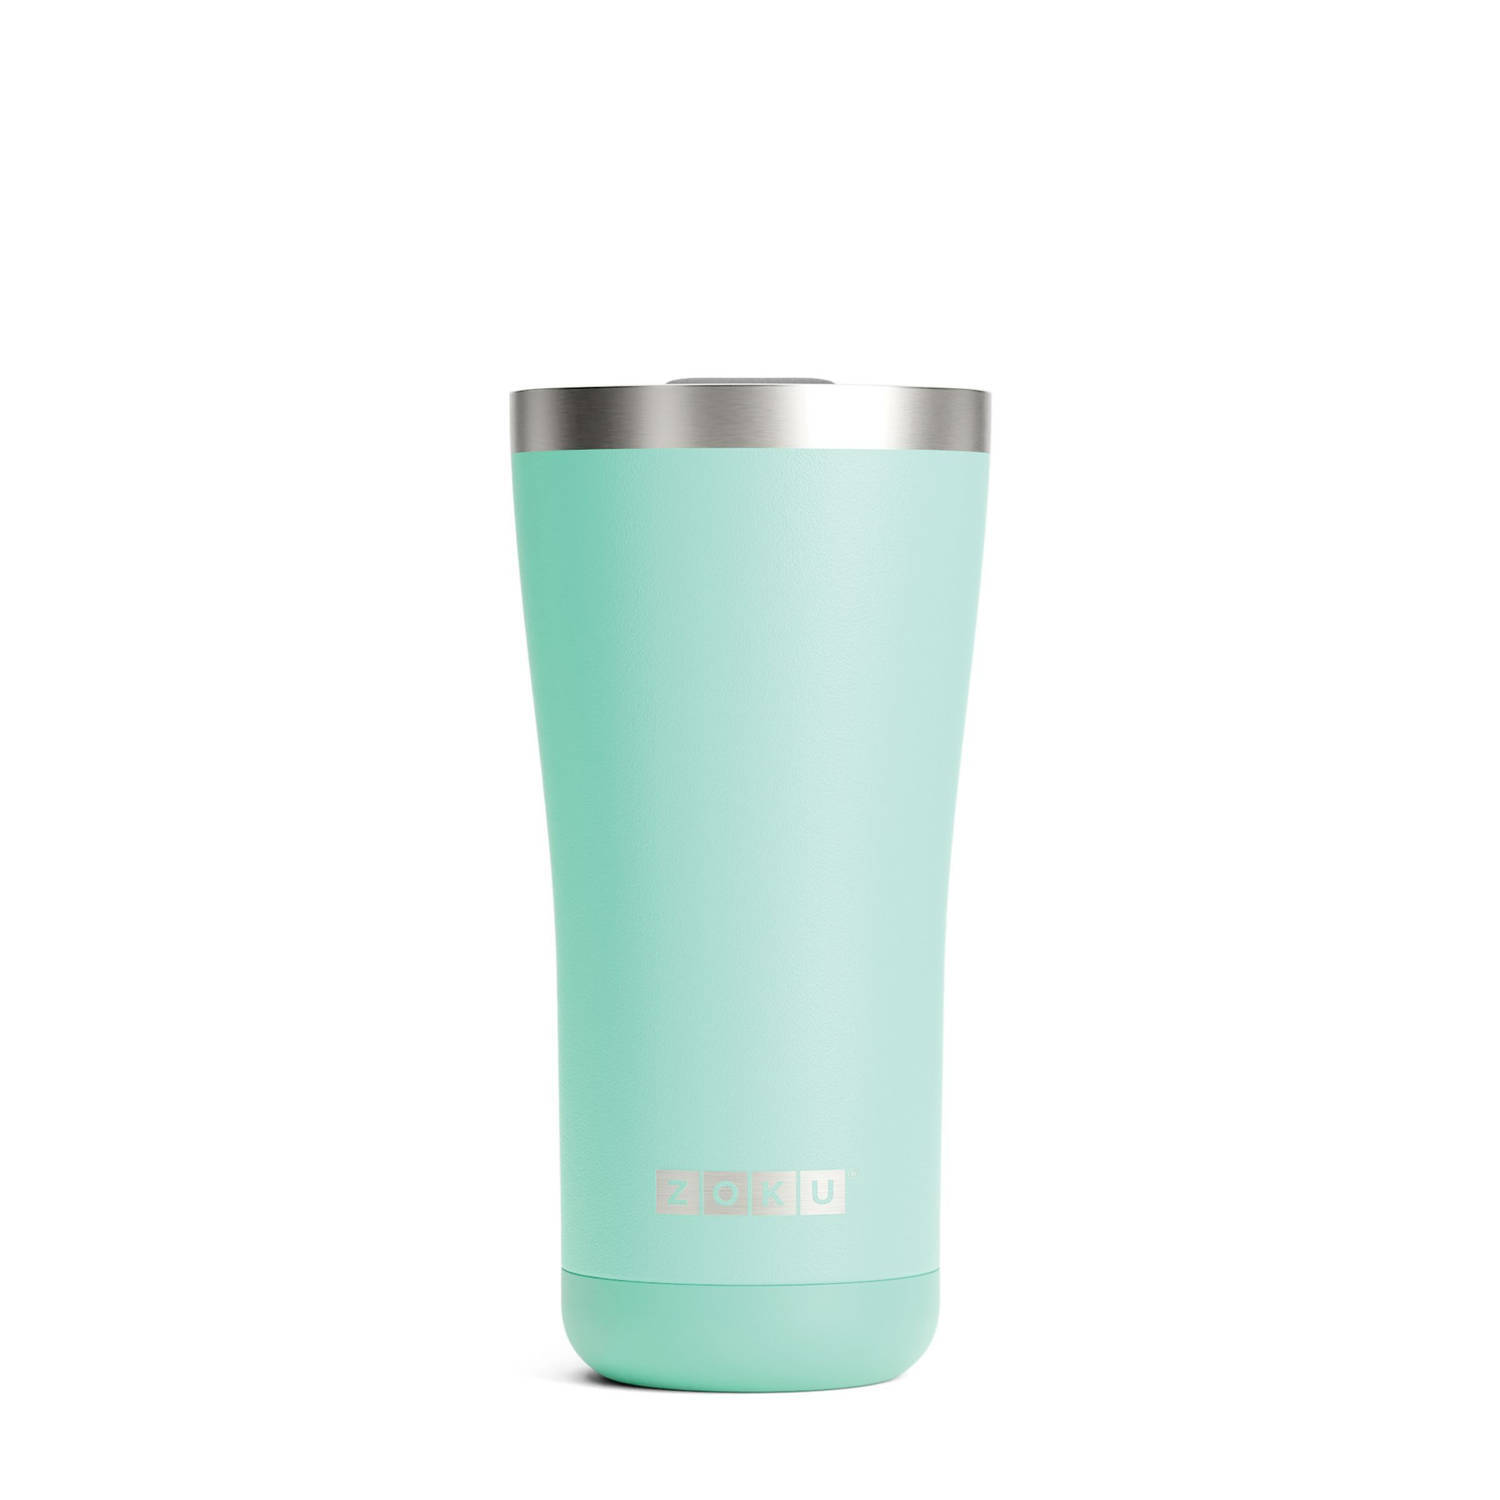 Zoku Thermosbeker RVS, 550 ml, Turquoise, 3-in-1 -